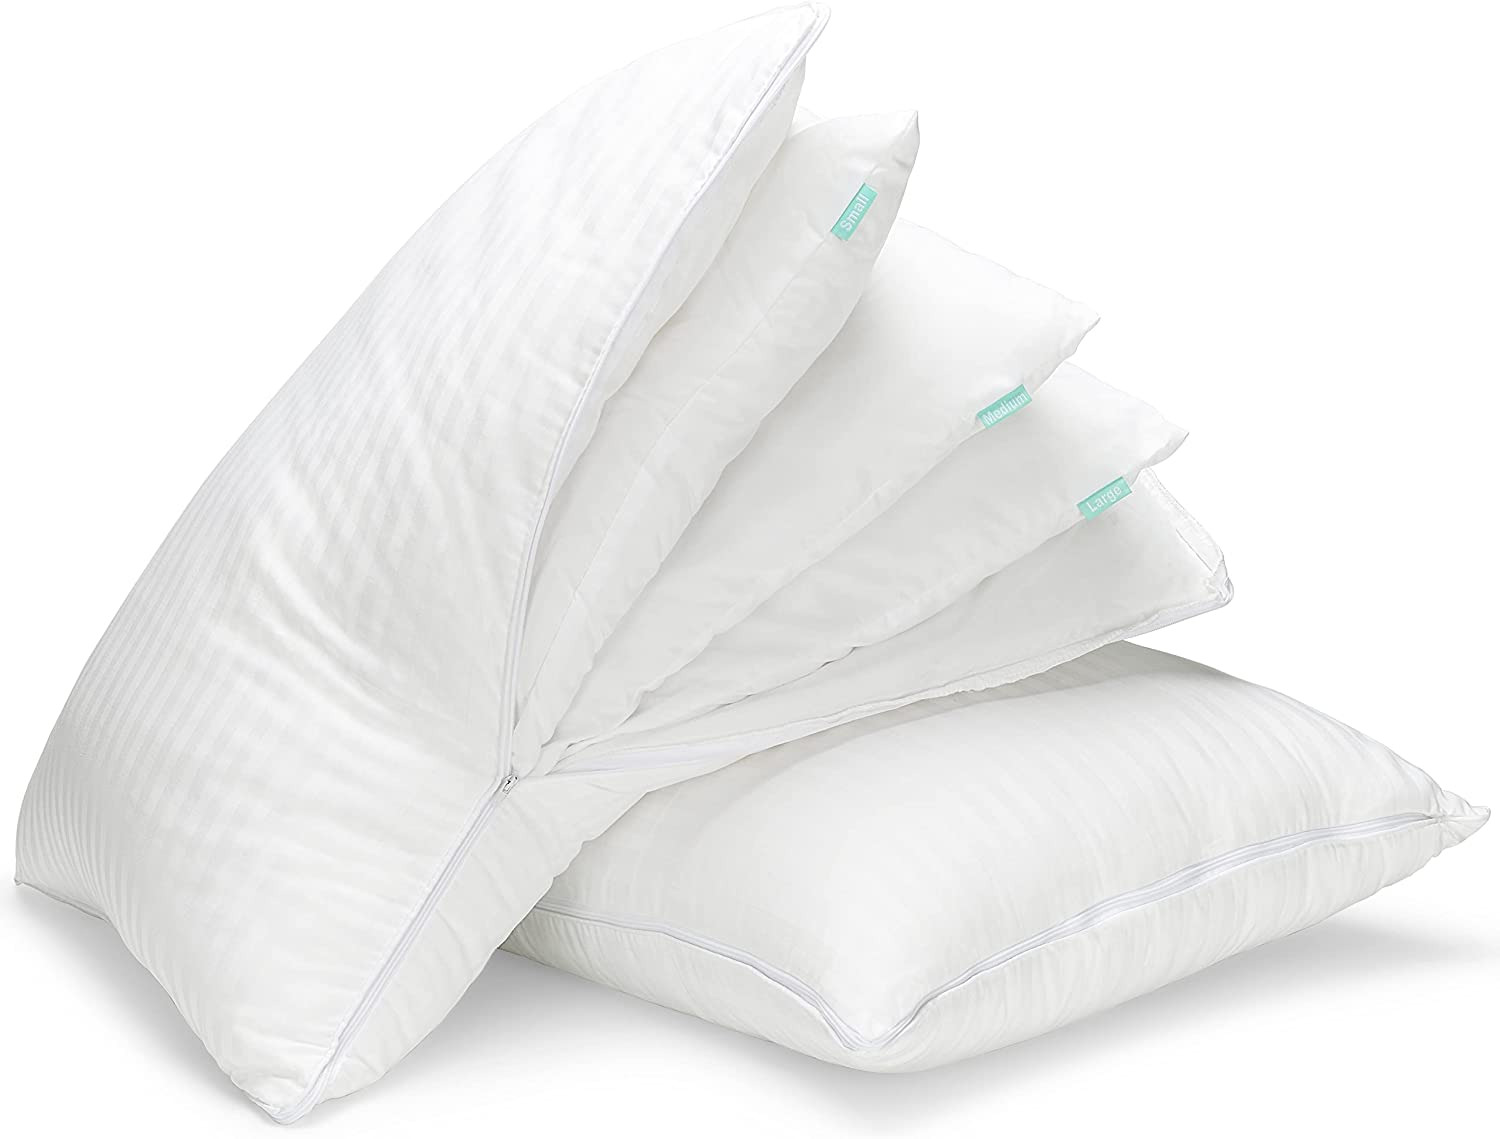 Adjustable Layer Pillows for Sleeping - Set of 2, Cooling, Luxury Pillows for Ba